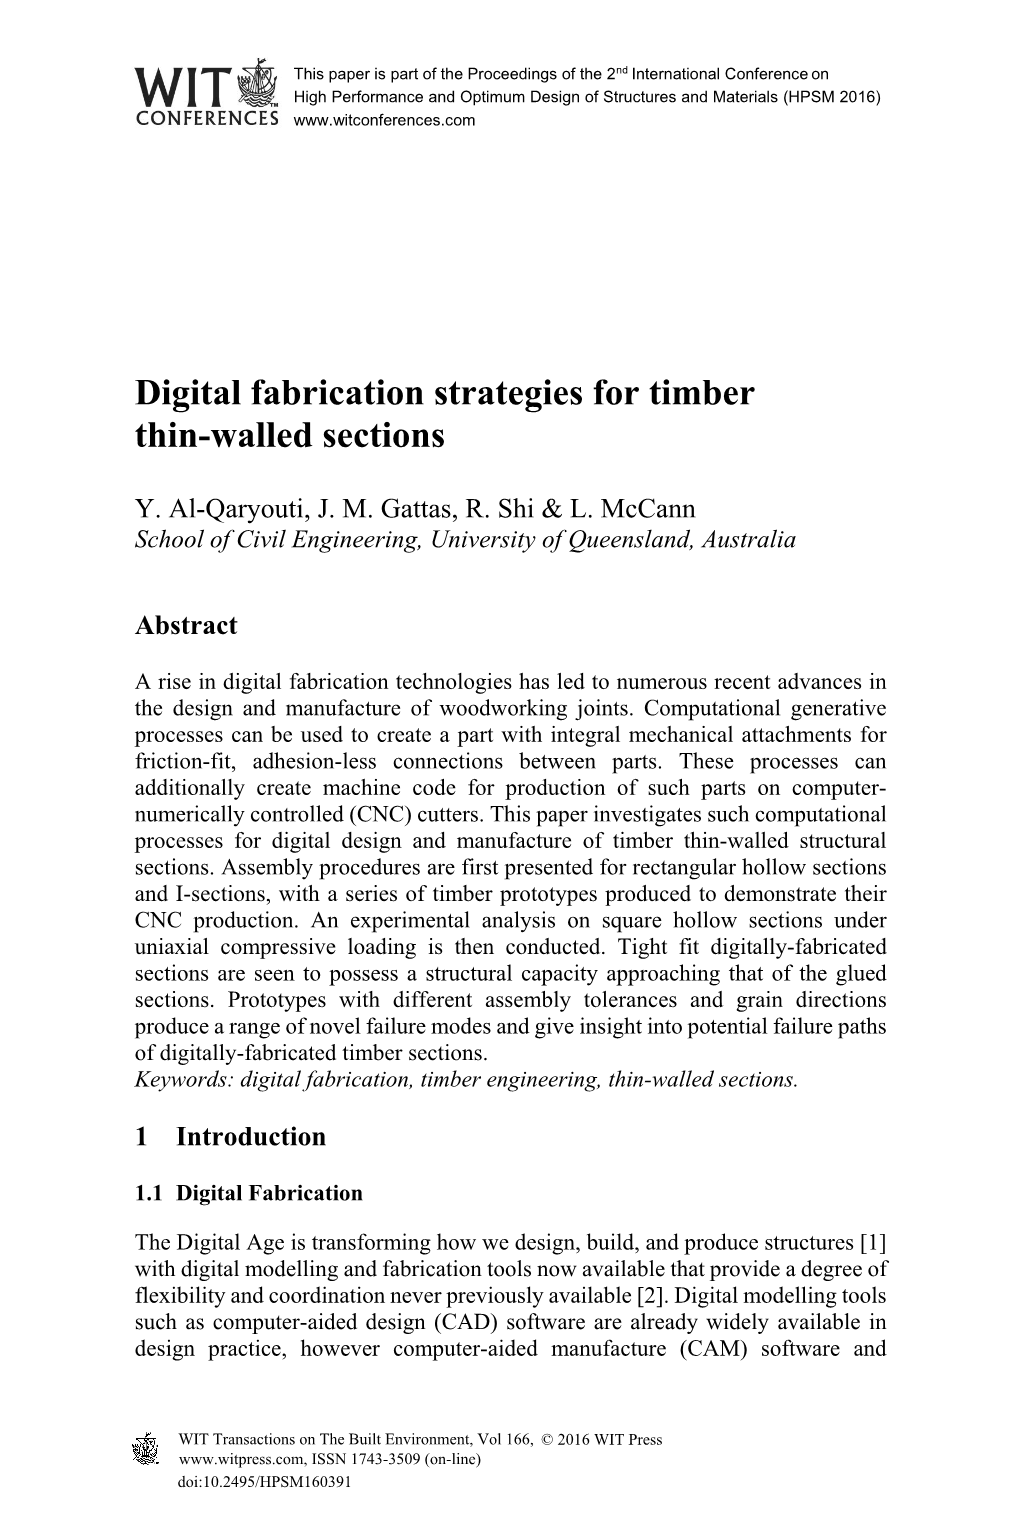 Digital Fabrication Strategies for Timber Thin-Walled Sections